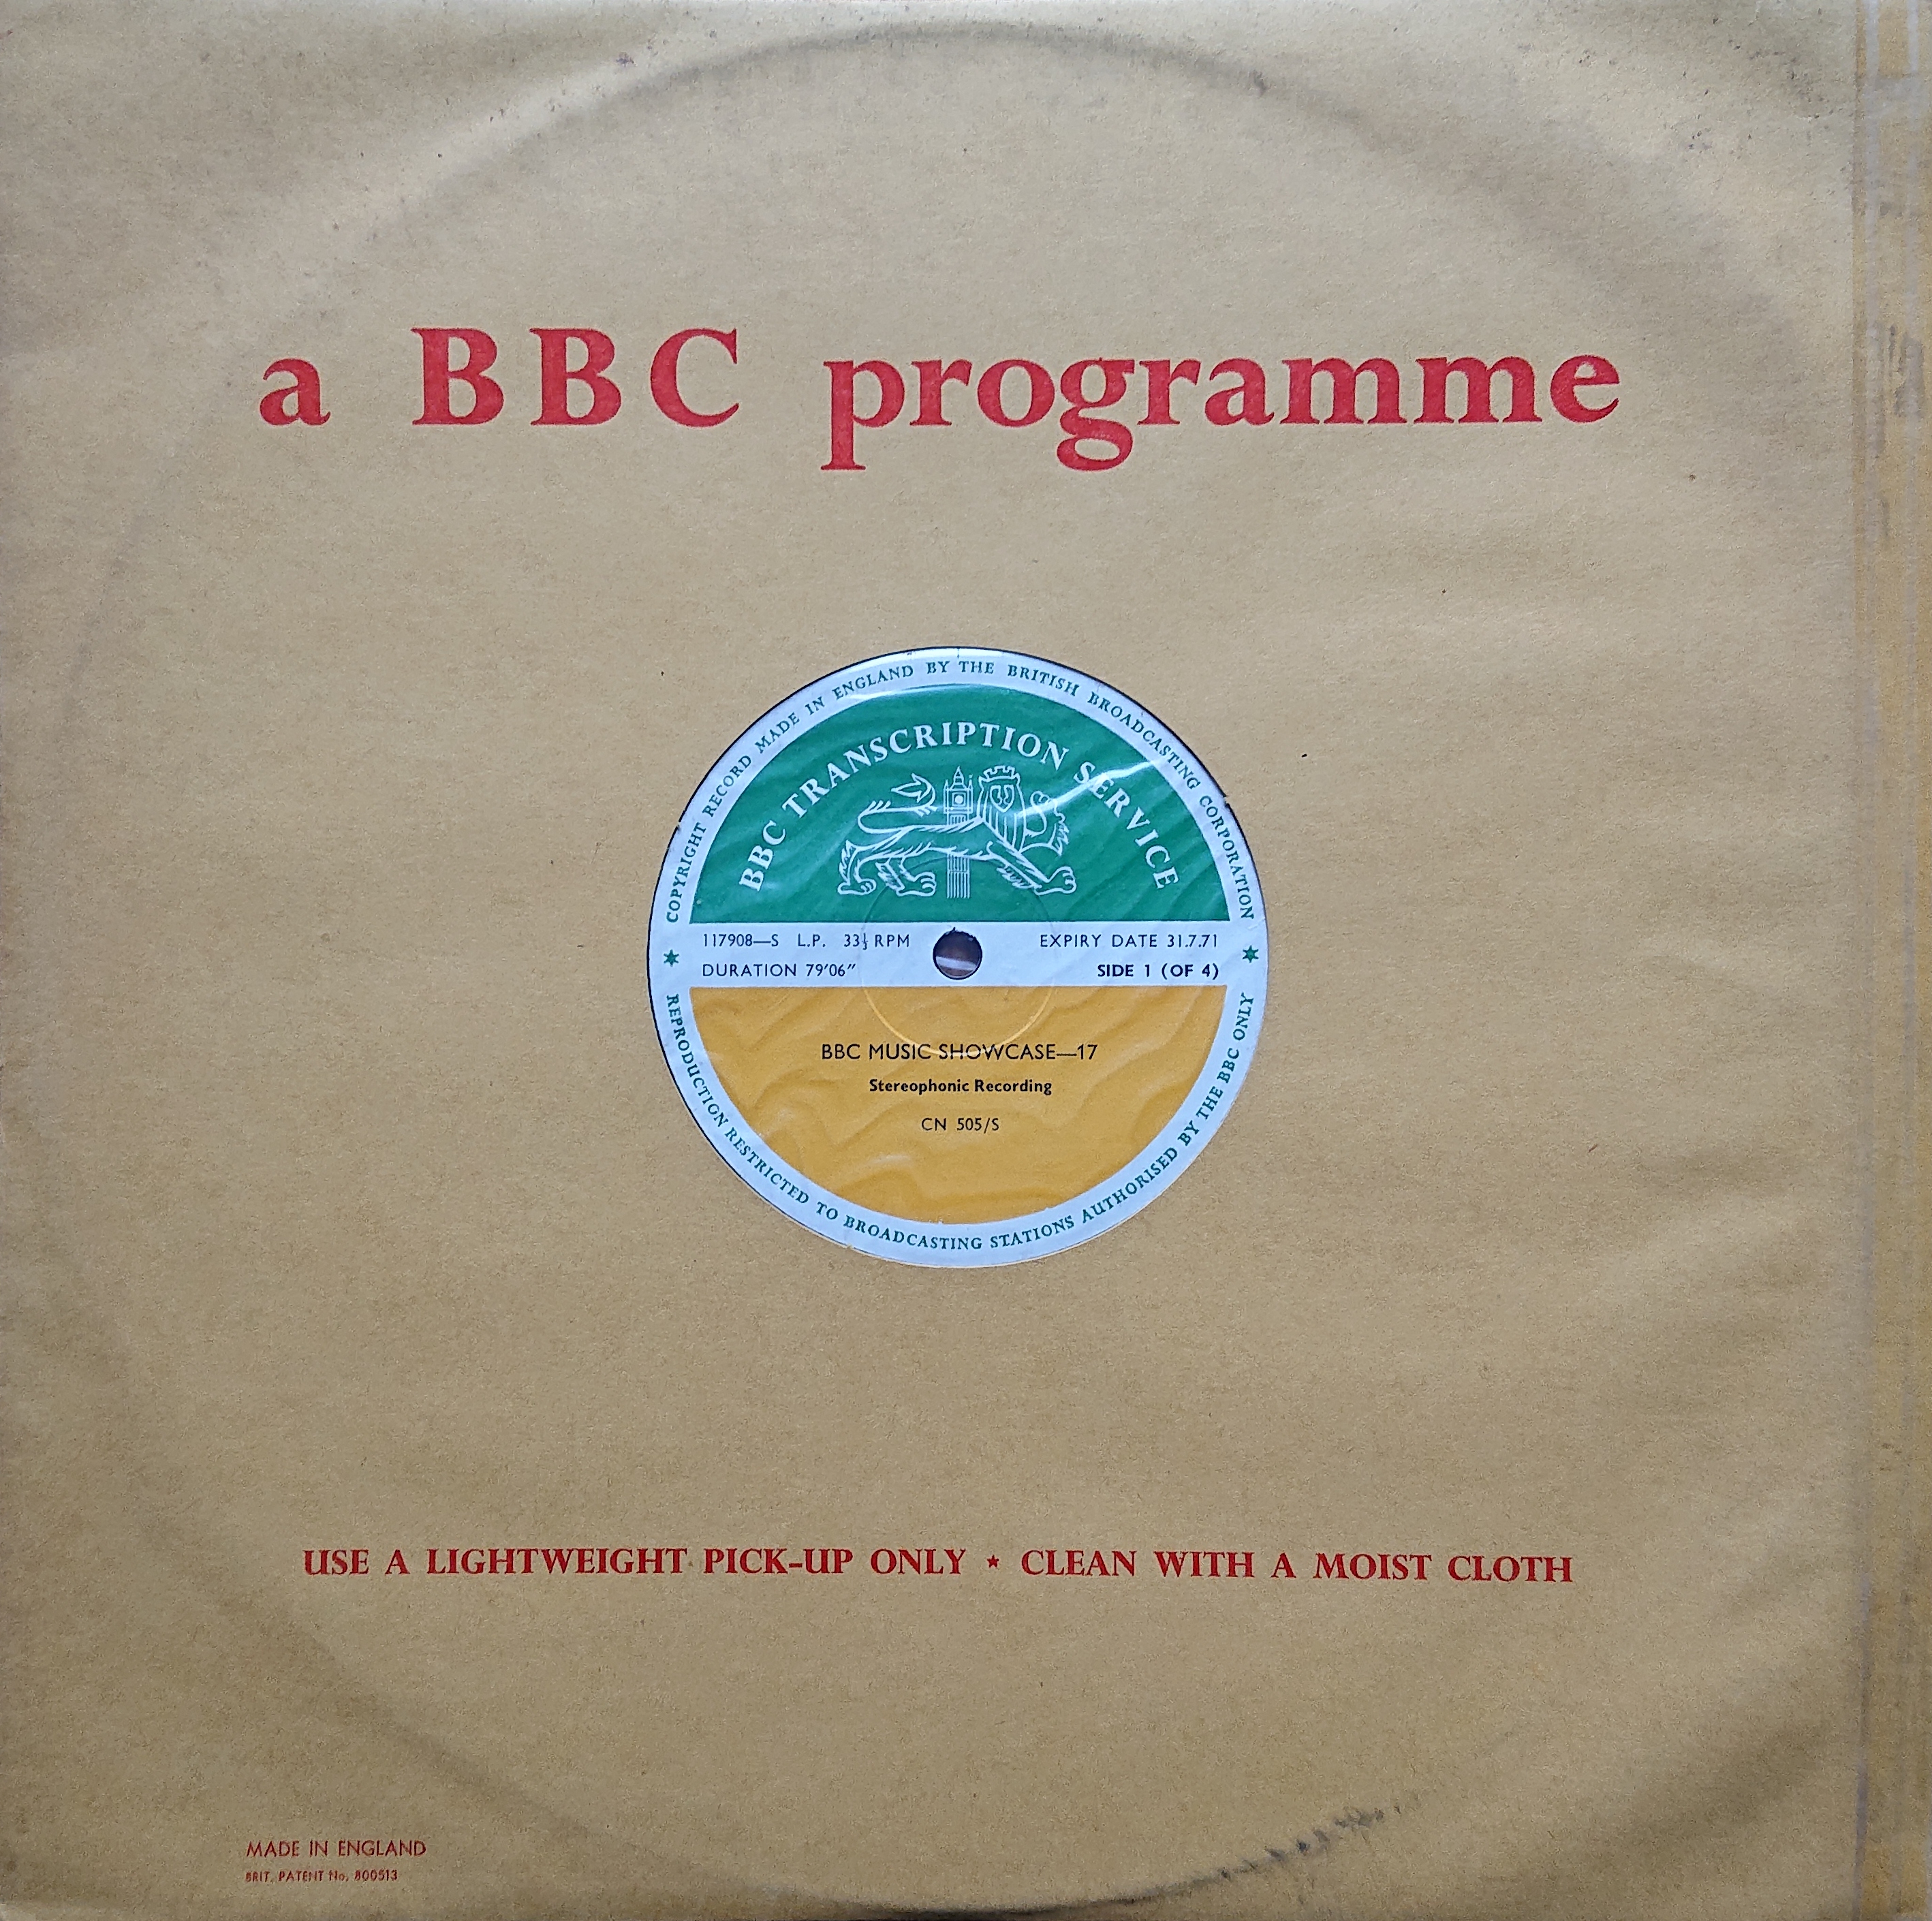 Picture of CN 505 S 33 BBC music showcase - 17 (Sides 1 & 3) by artist Various from the BBC records and Tapes library